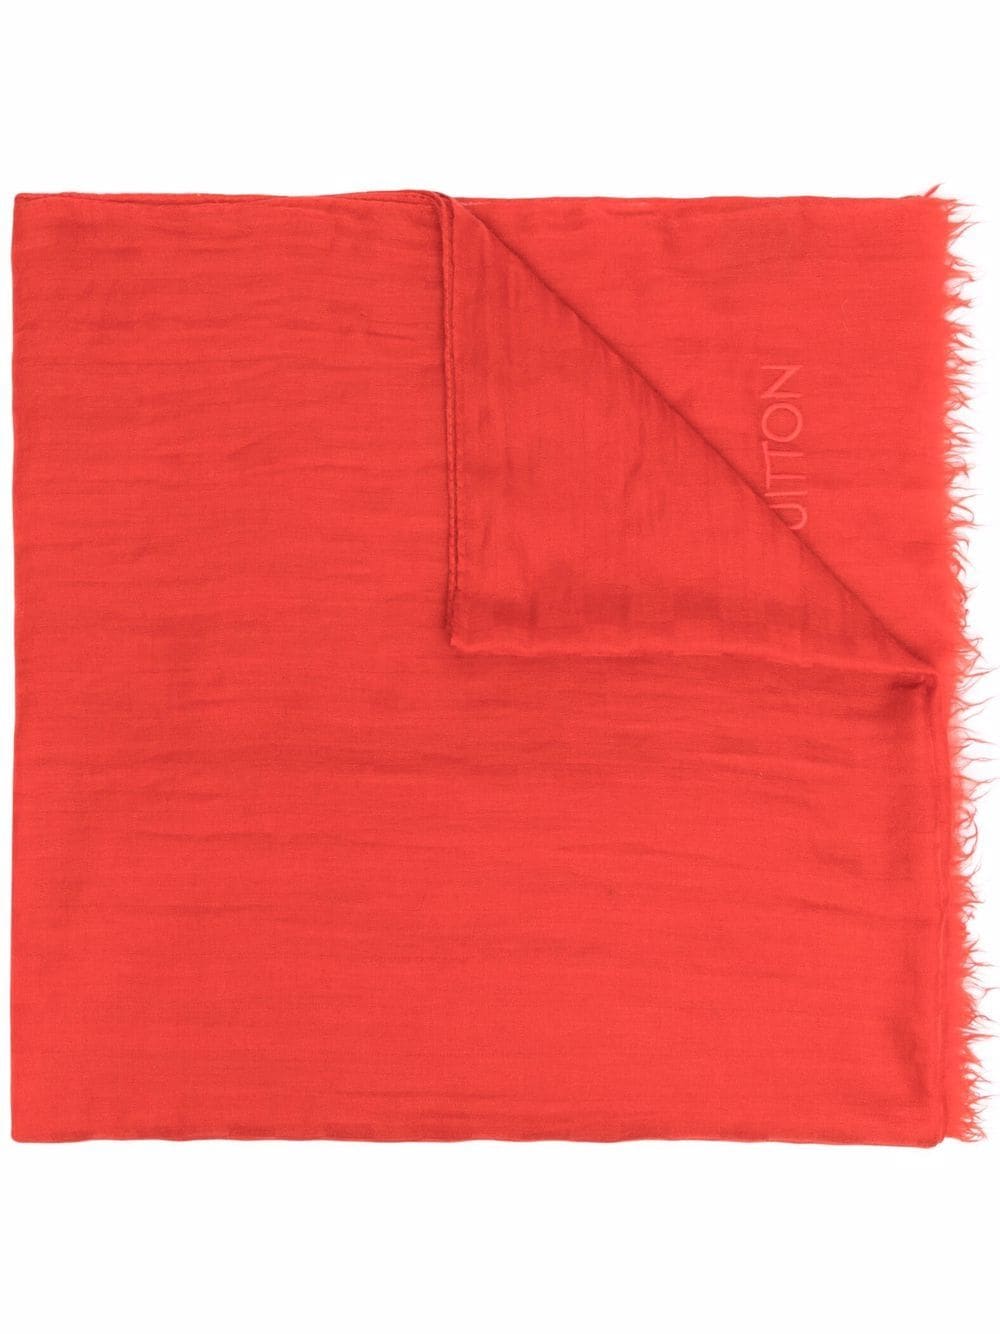 Louis Vuitton Pre-Owned 2010s frayed cashmere shawl - Red von Louis Vuitton Pre-Owned